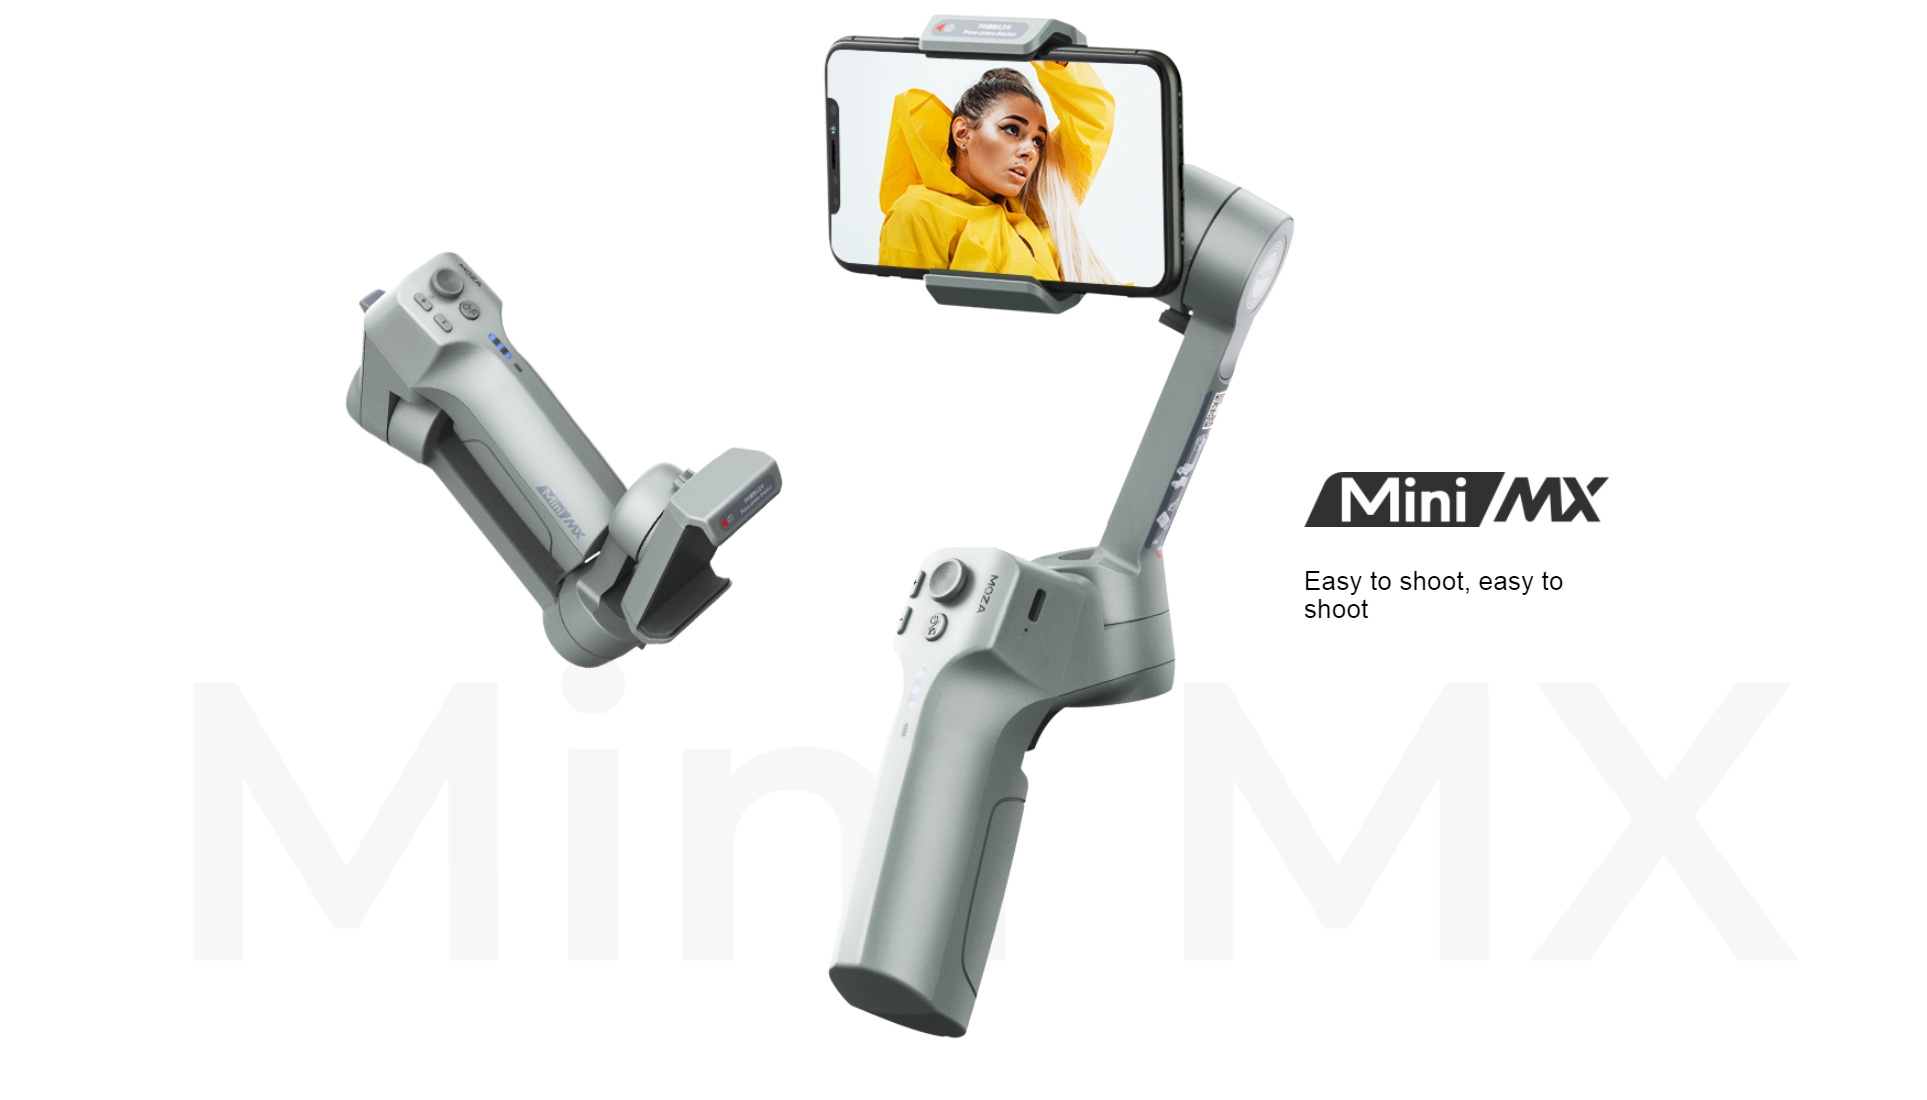 Moza Mini MX Handheld Gimbal Stabilizer Portable Anti-shake Selfie Stick Support bluetooth Built-in Battery For iPhone Huawei XiaoMi Smartphone Vlog